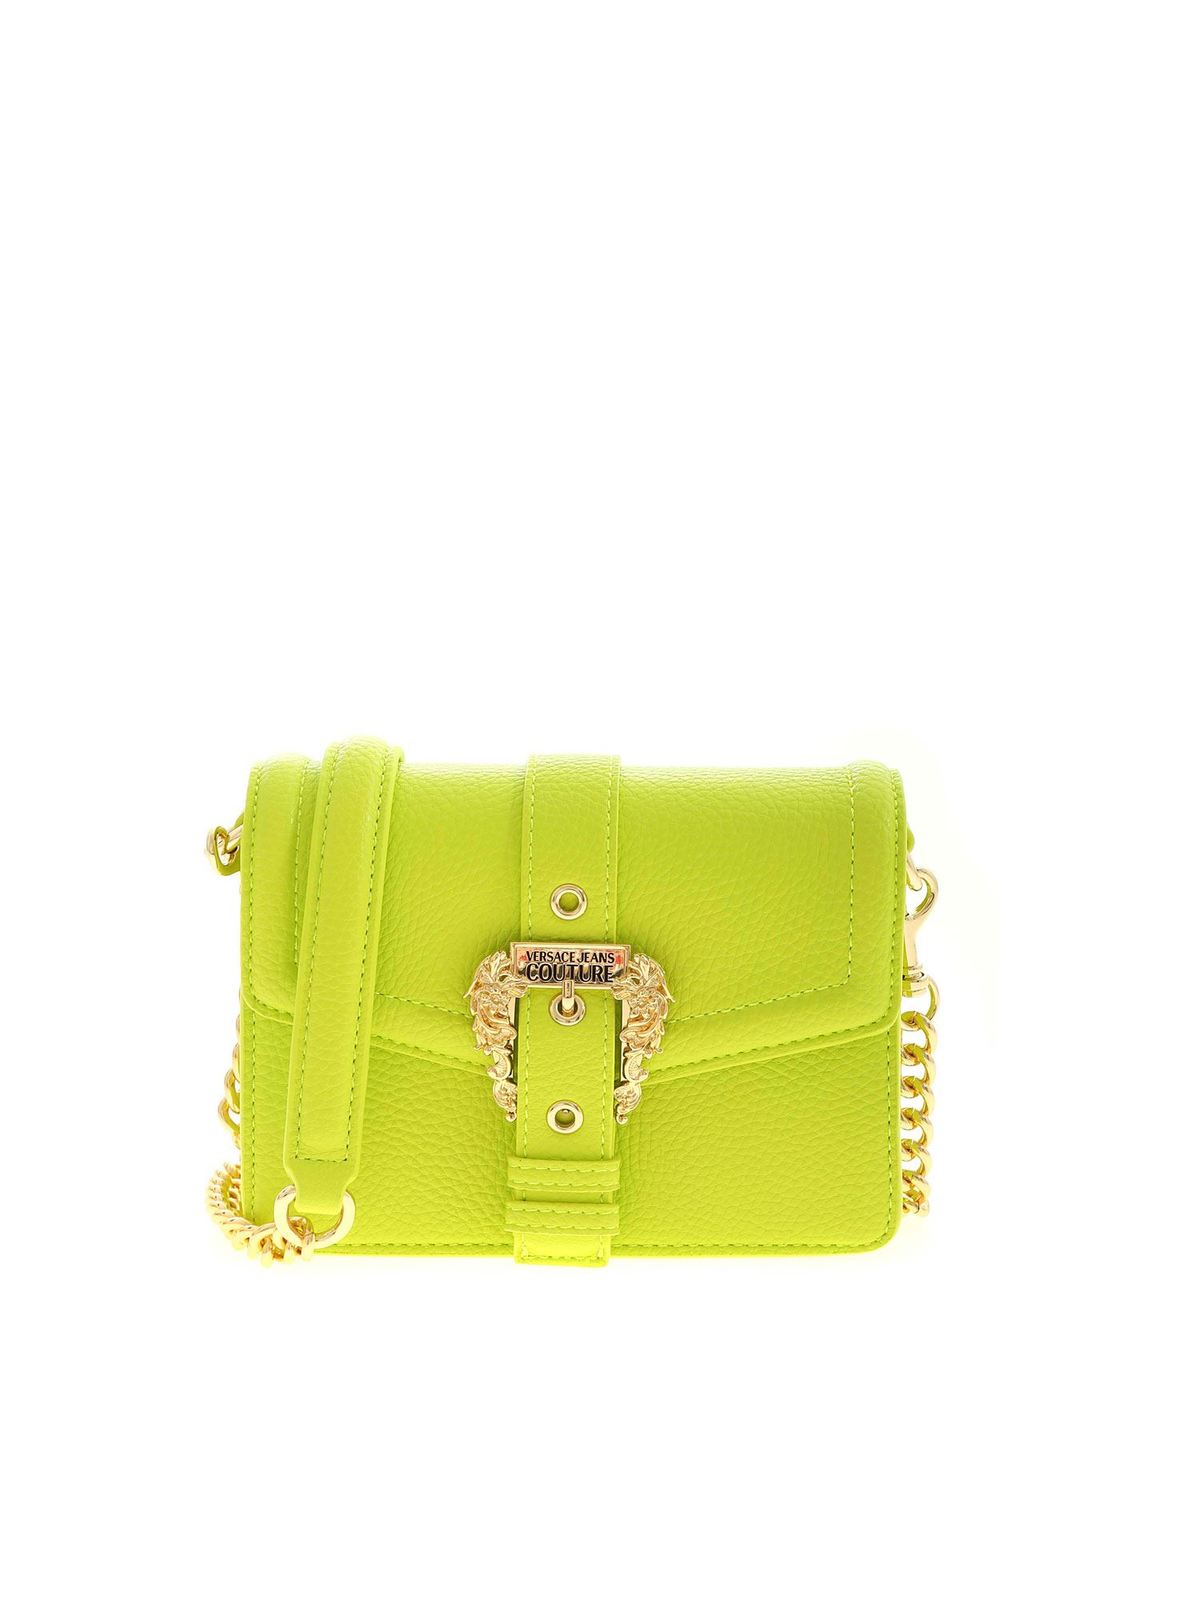 Cross body bags Versace Jeans Couture - Couture bag in lime green -  E1VZABF671578156